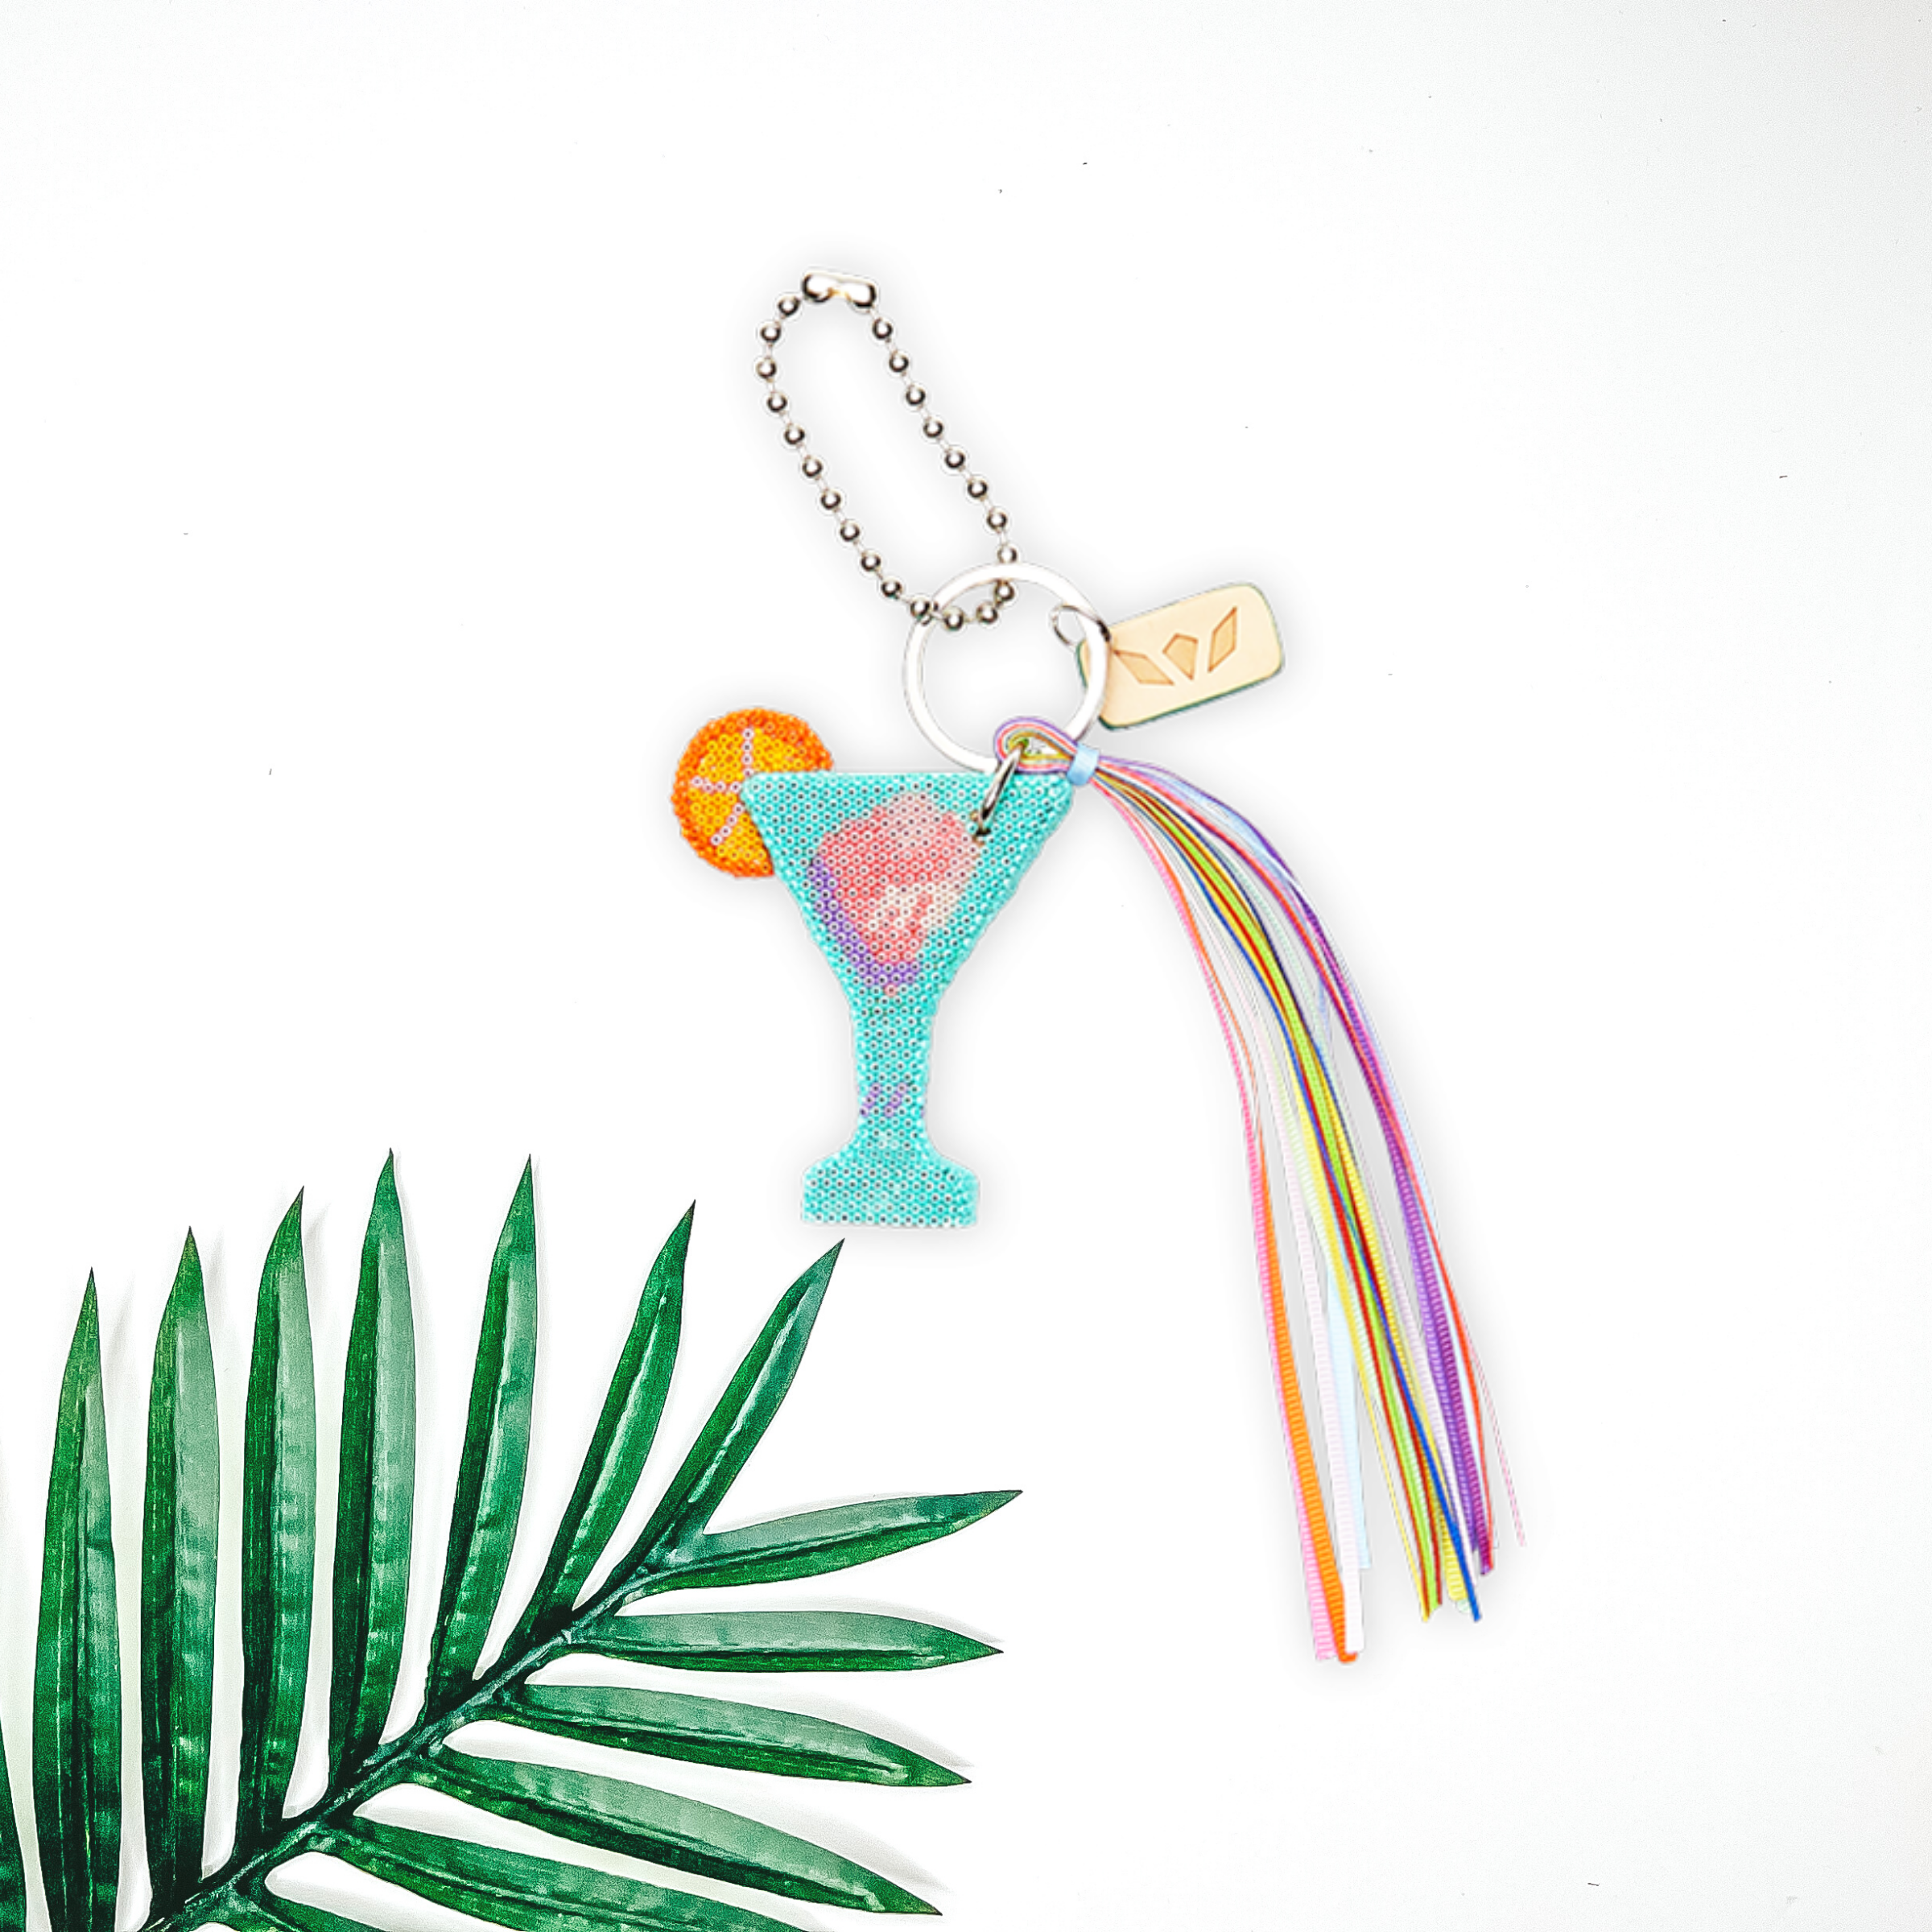 Centered in the middle of the picture is a beaded butterfly charm with multi-colored tassels. To the right of the charm is a palm leaf, all on a white background. 